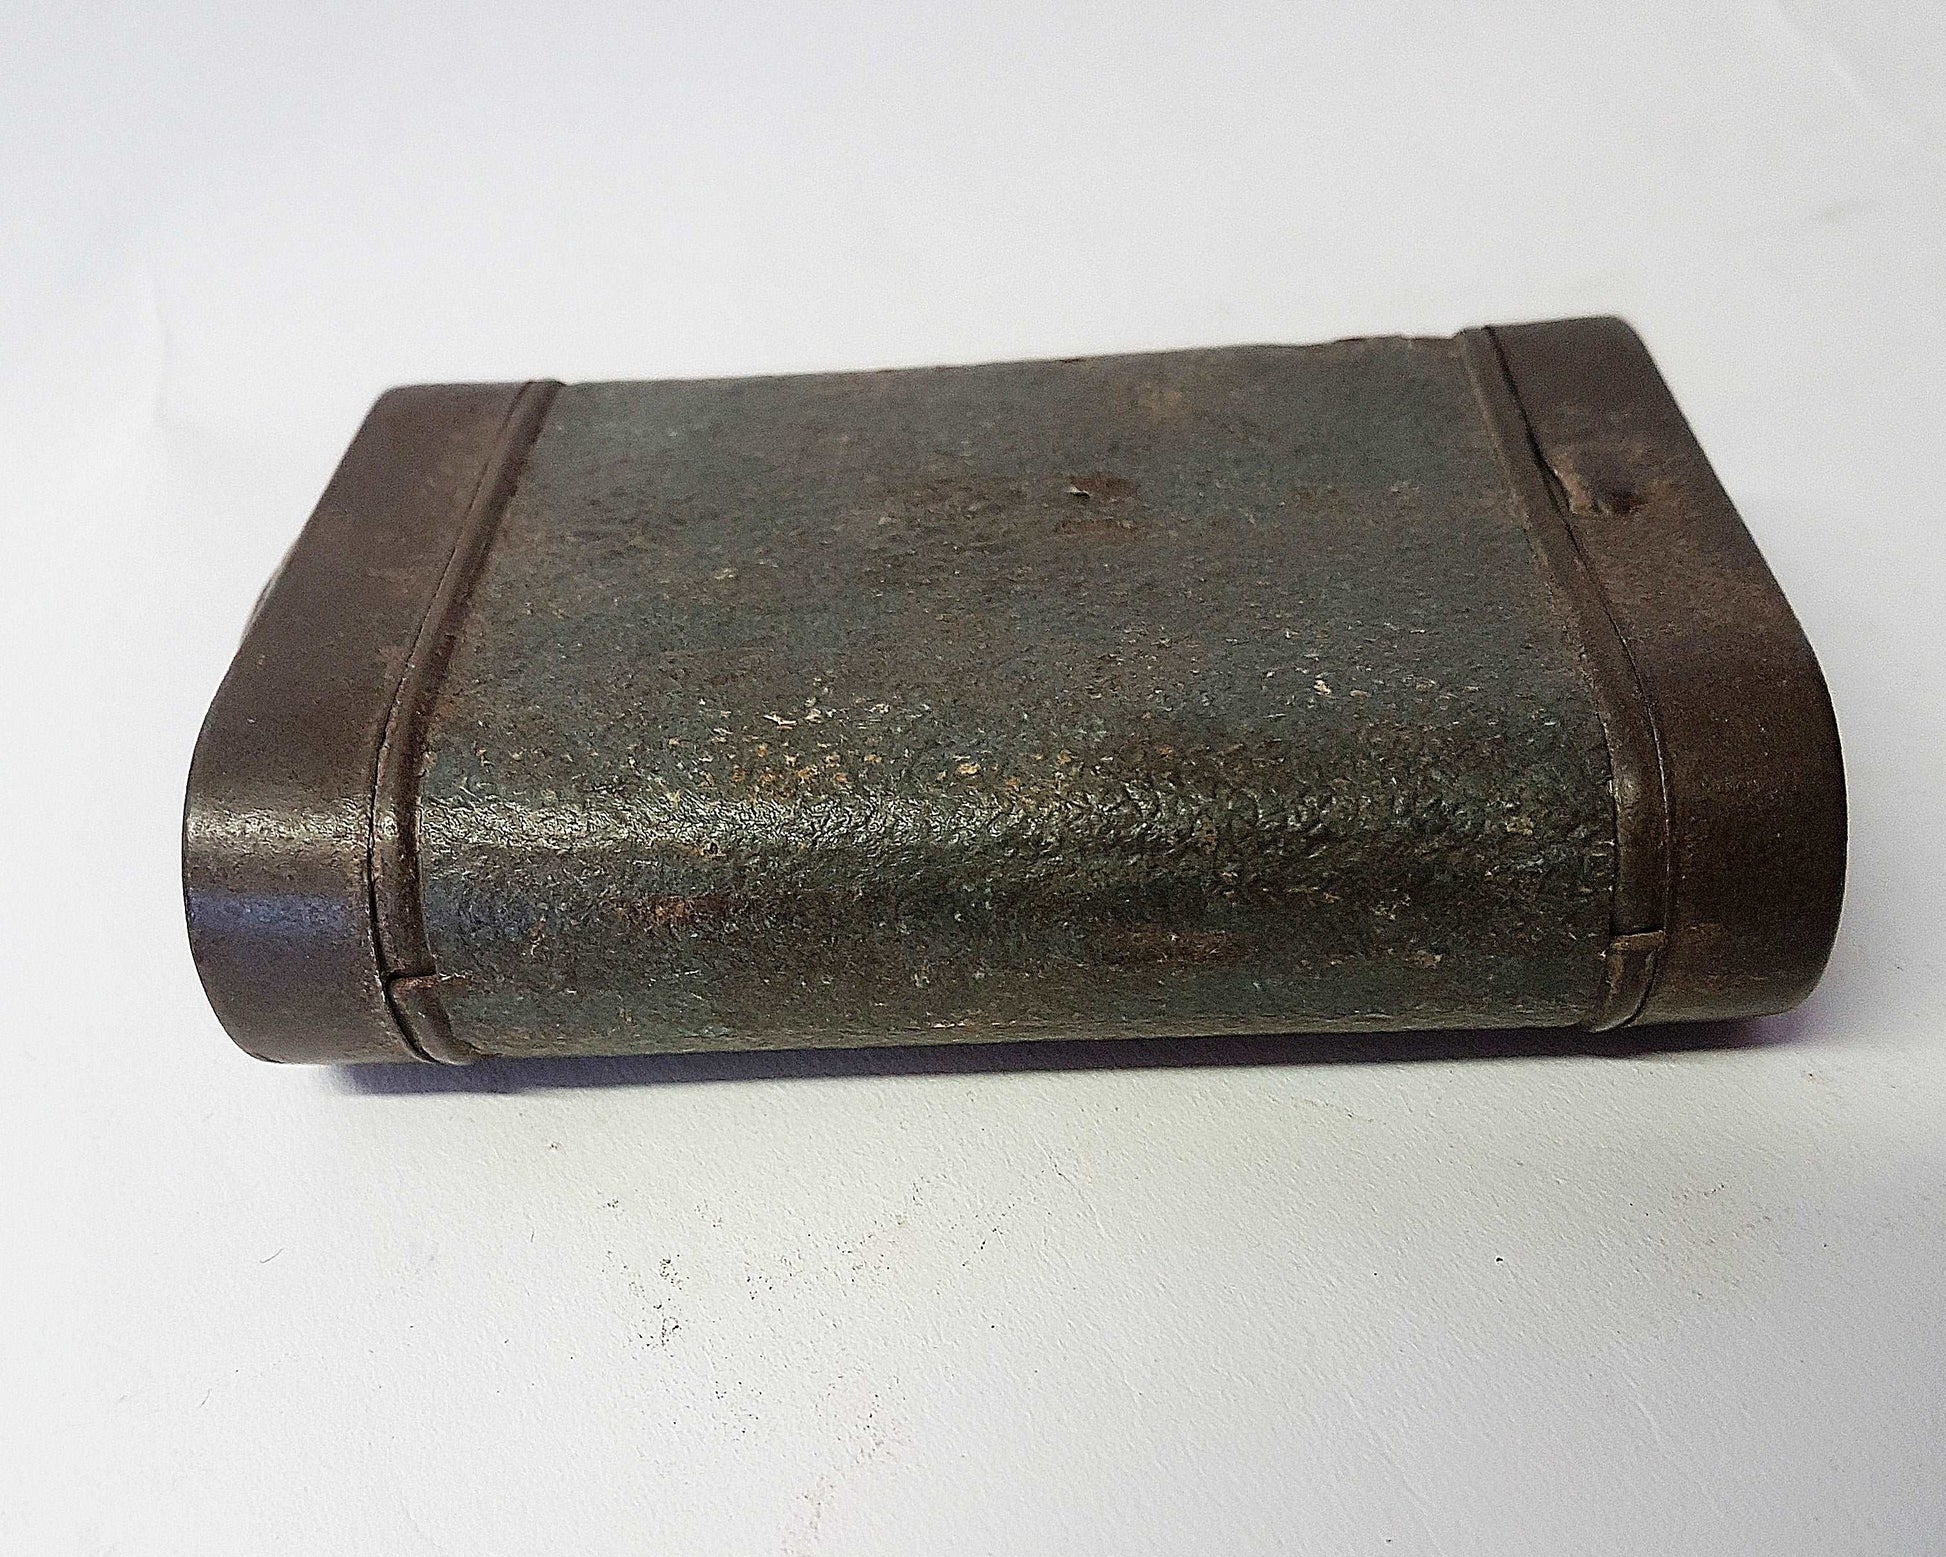 Antique vintage metal flashlight. Green leather pocket torch. 4 inches high by 2.75 inches wide. Not in working order. Rare collectible.